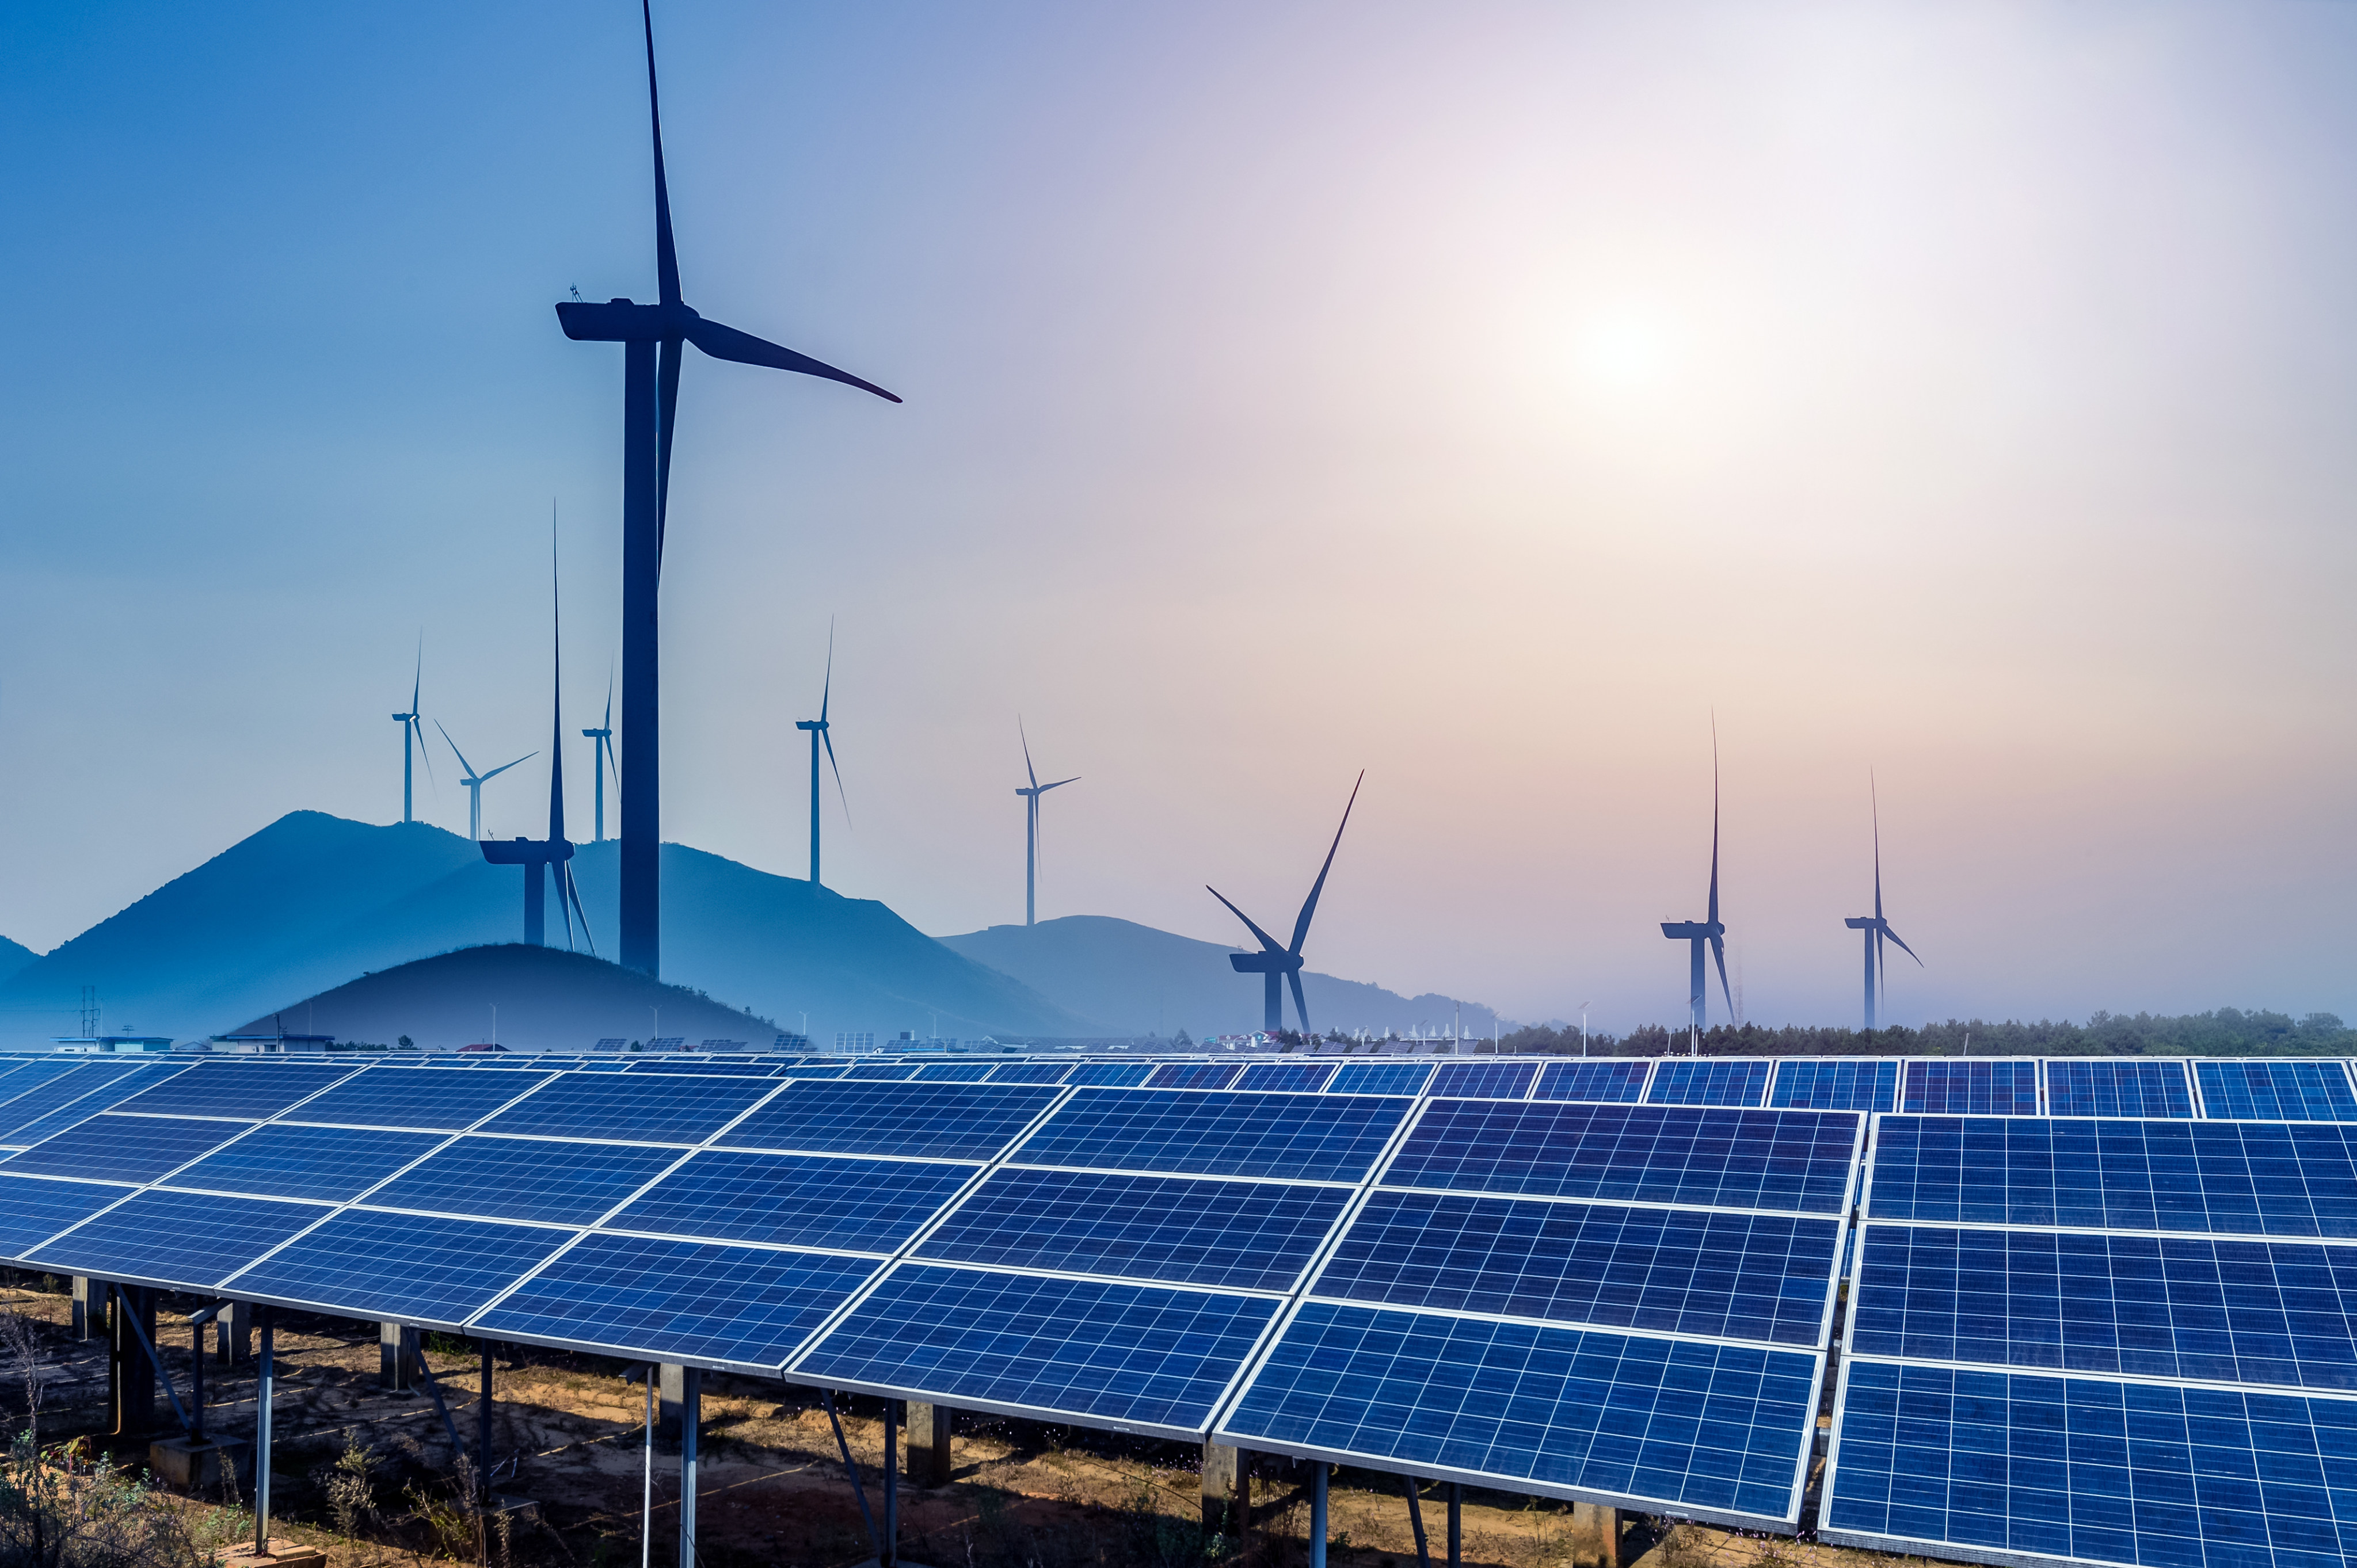 Sectors related to clean energy, including renewables, nuclear power, electricity grids, energy storage, electric vehicles and railways, were the biggest contributors to China’s economic growth in 2023, according to the Helsinki-based Centre for Research on Energy and Clean Air. Photo: Shutterstock